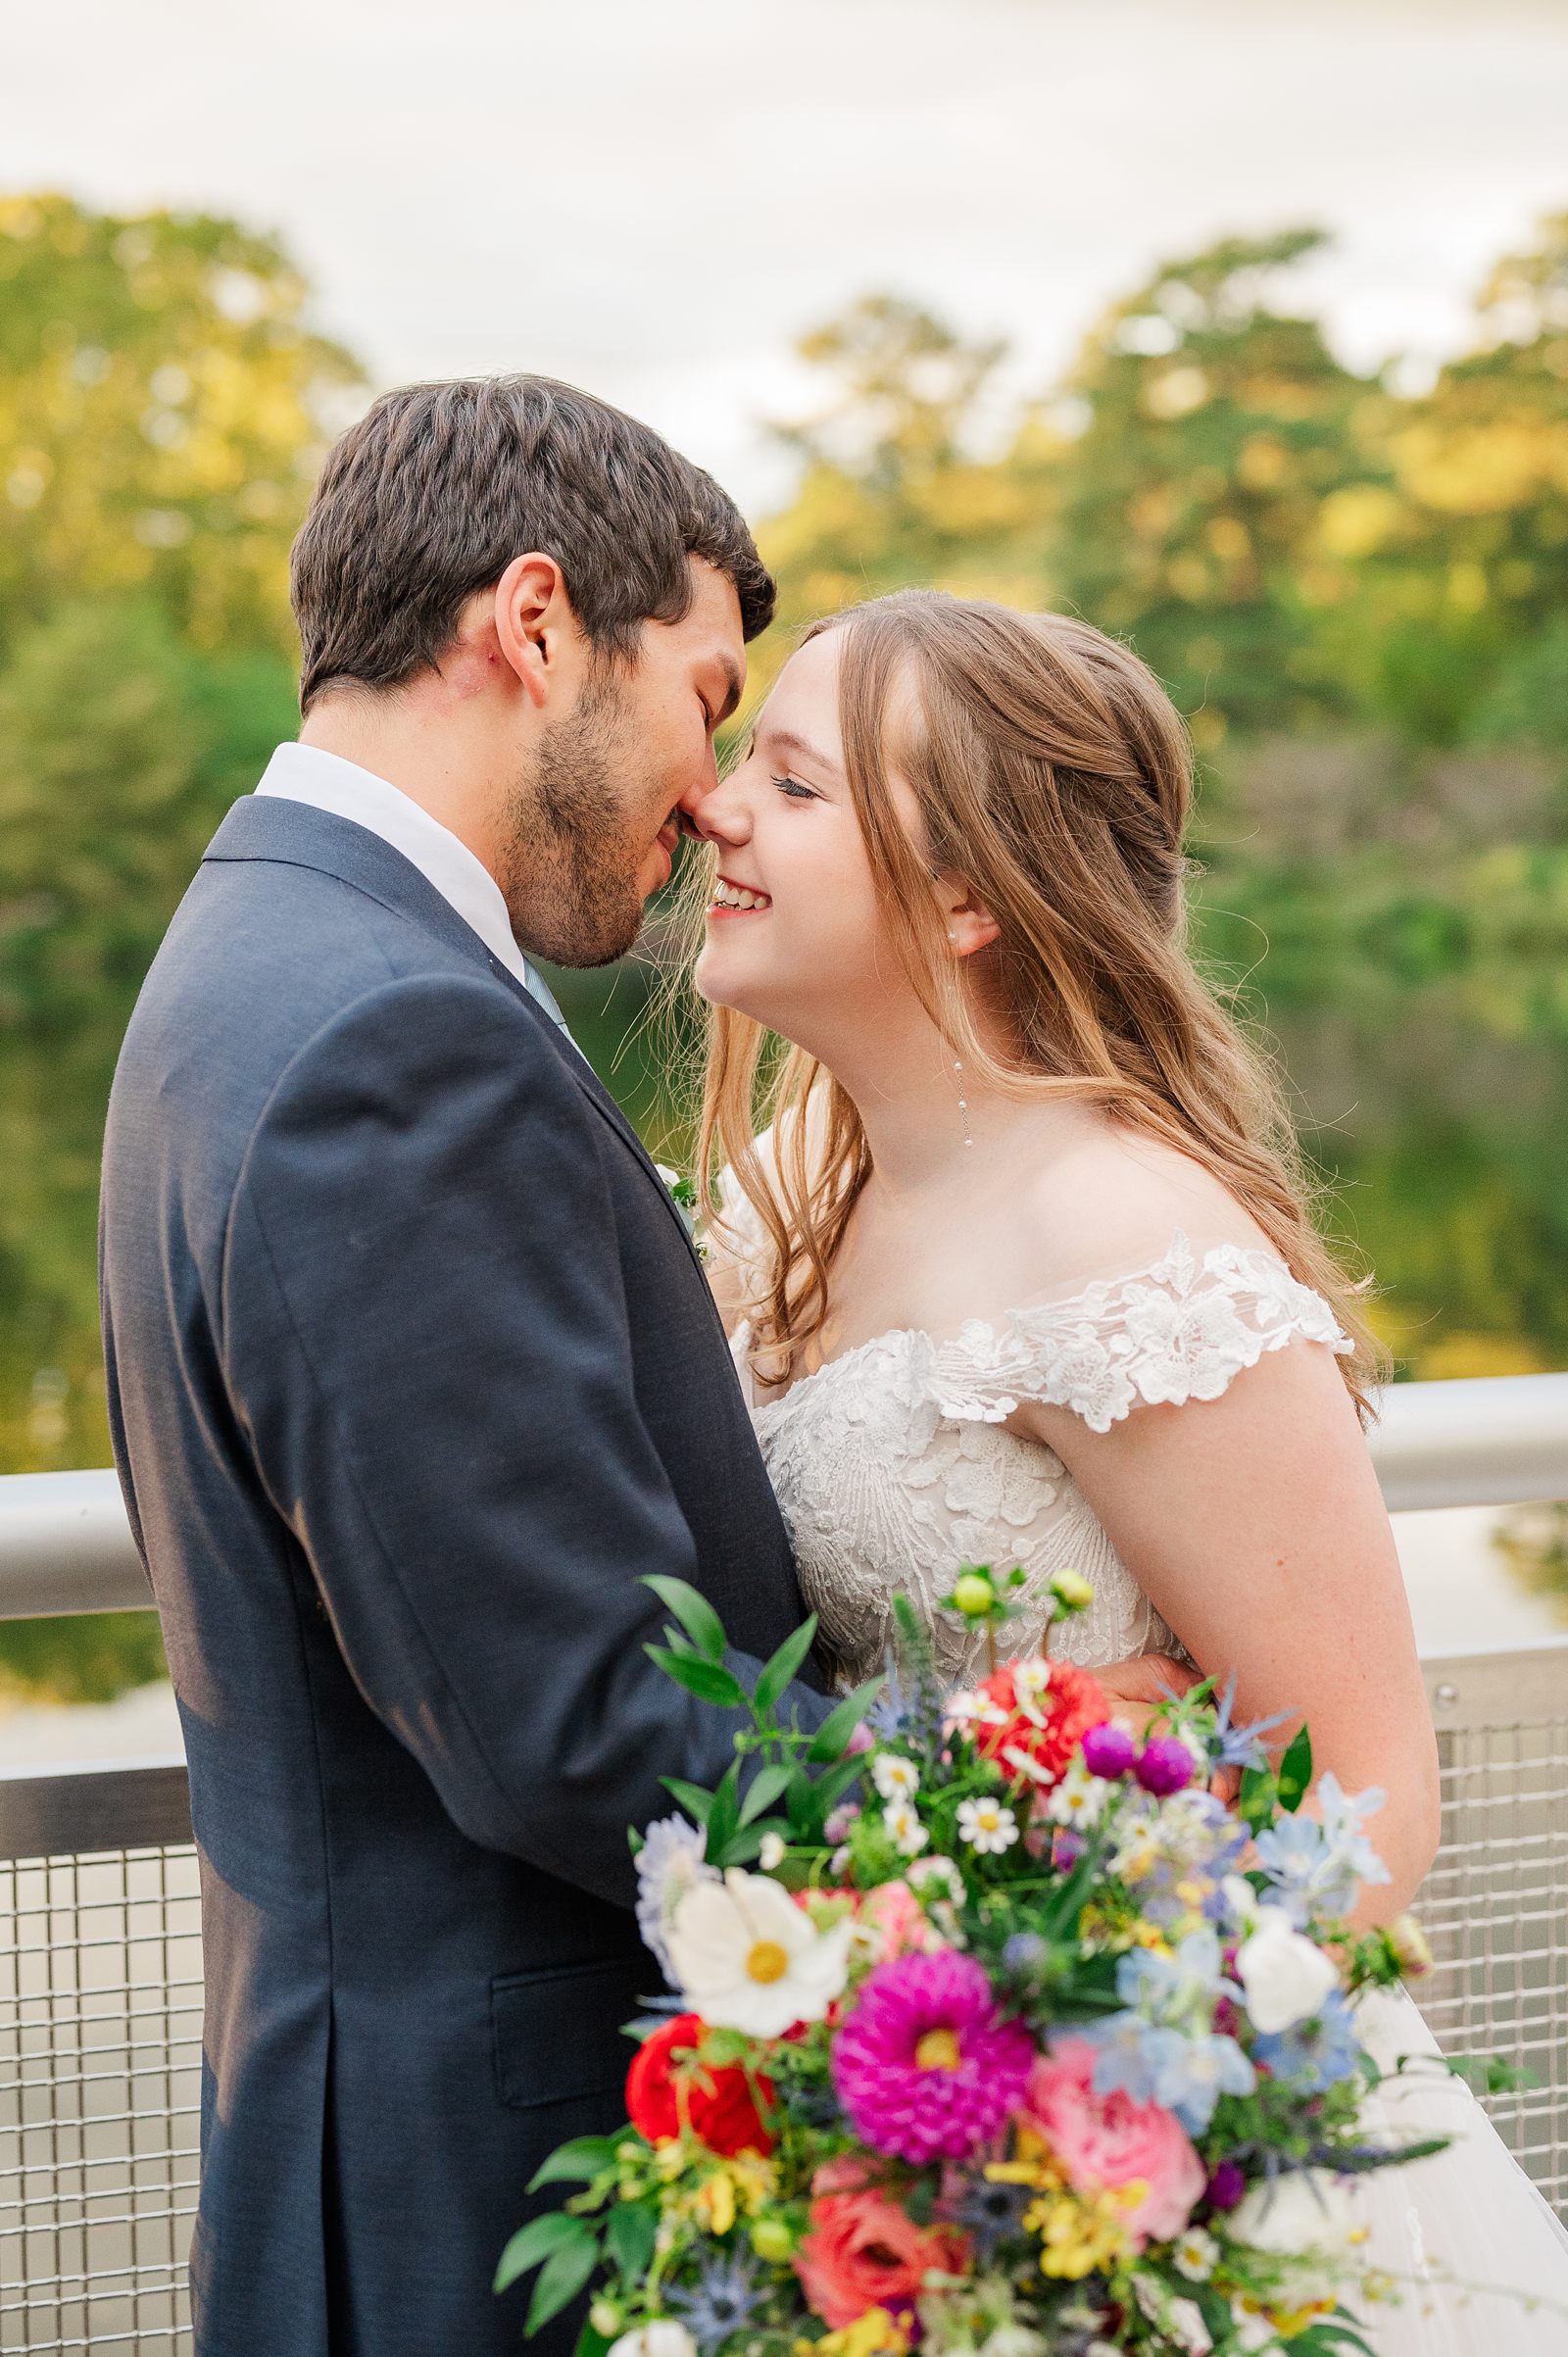 Bride and Groom Portraits at Fall Lewis Ginter Wedding in Rose Garden